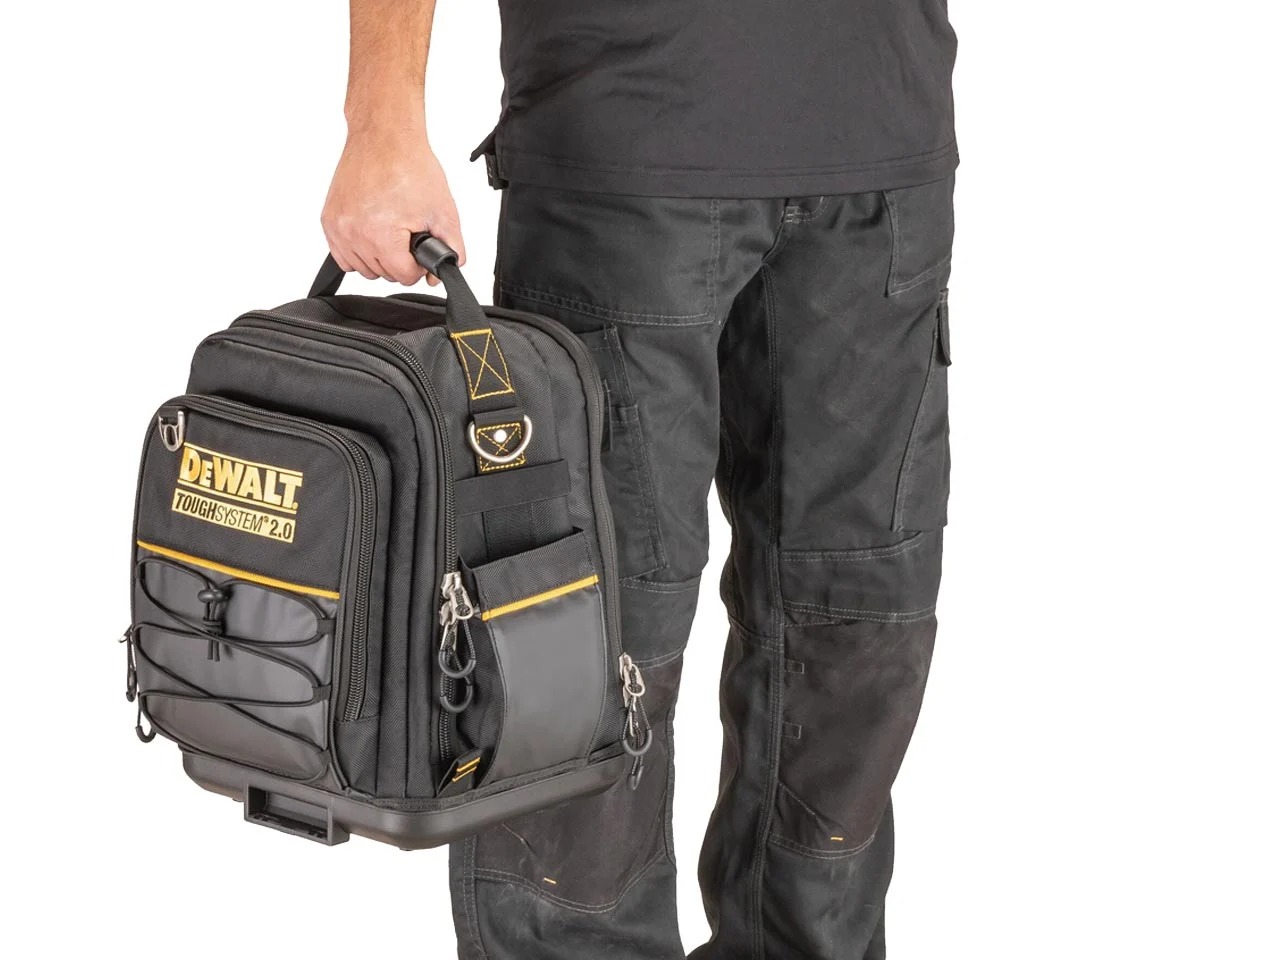 The @stanleytoolsuk STA195611 Fatmax Tool Technicians Backpack is